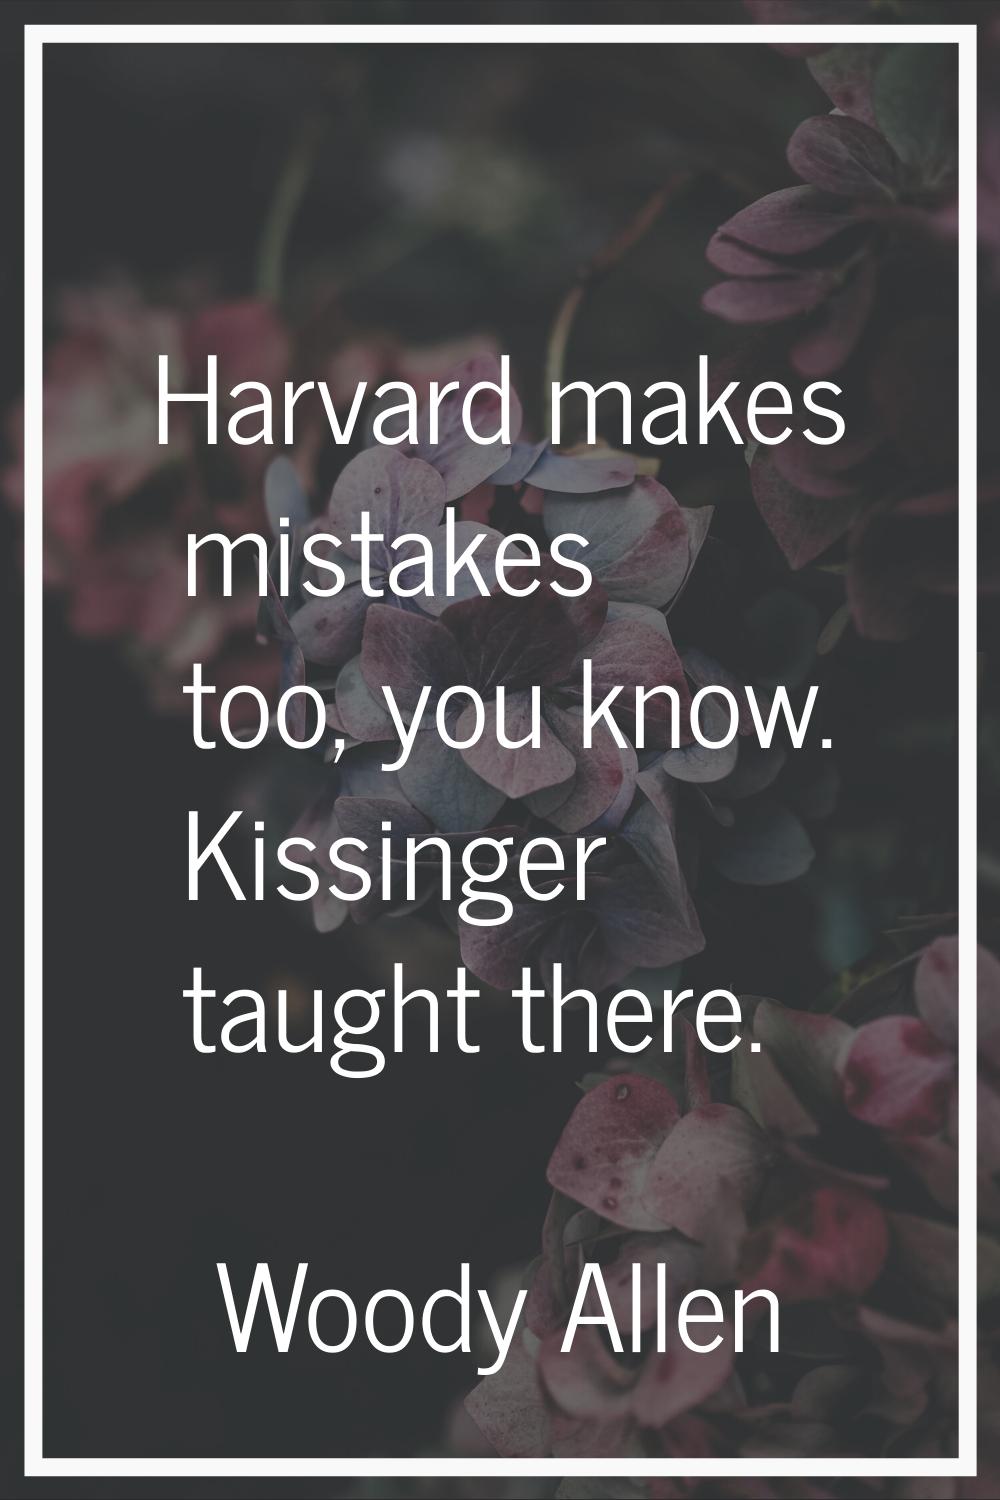 Harvard makes mistakes too, you know. Kissinger taught there.